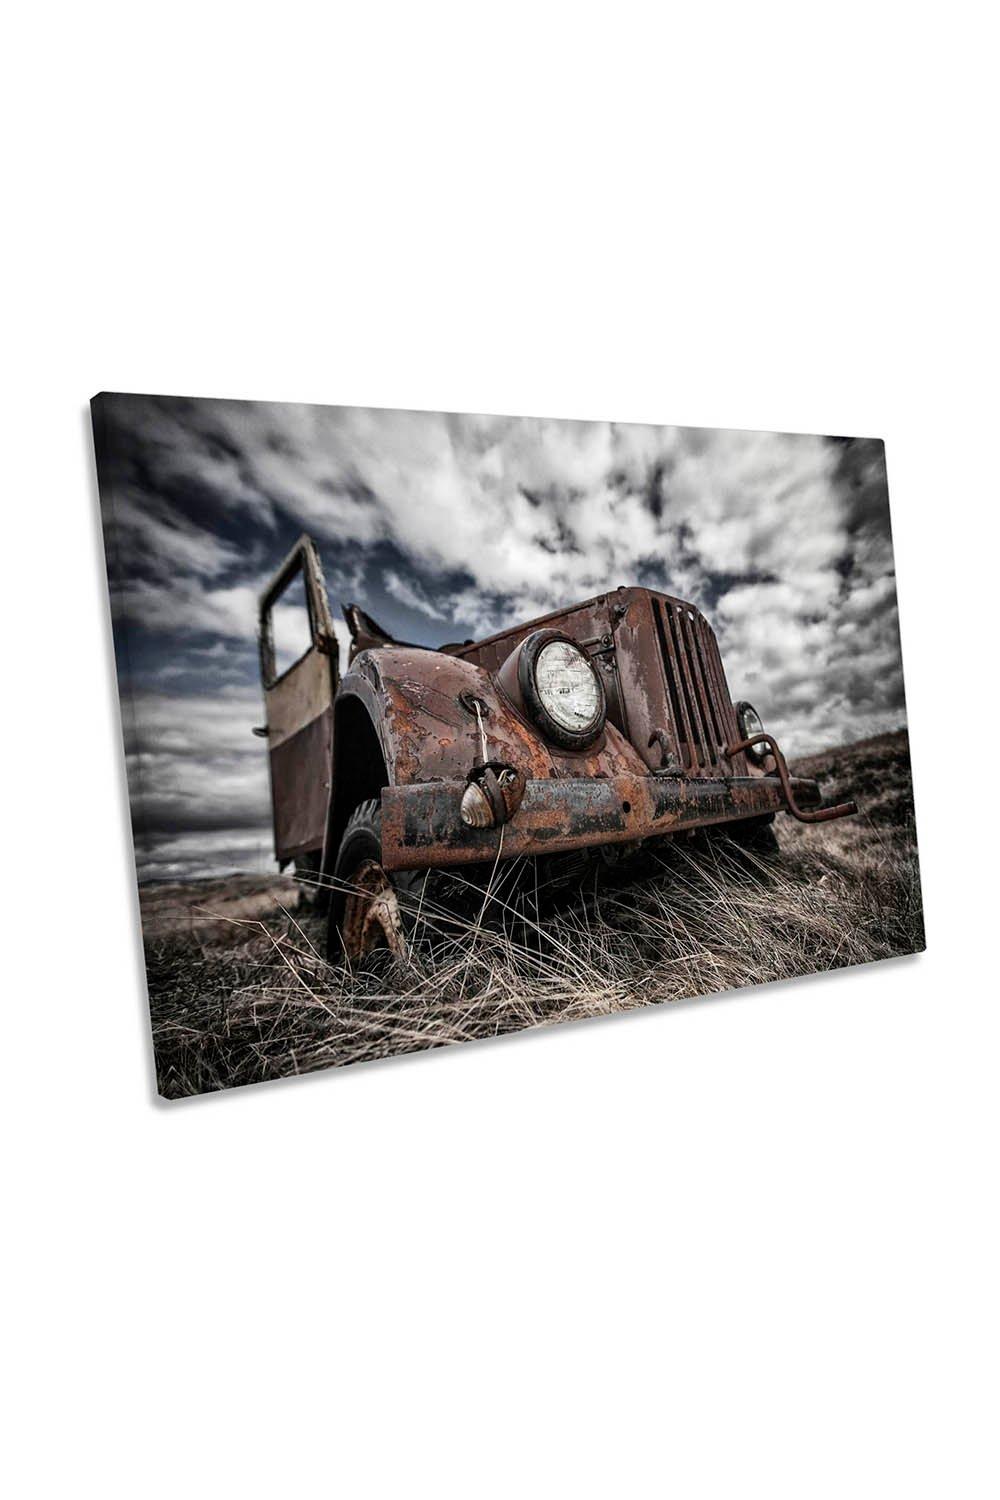 The Eye Abandoned Rusty Truck Canvas Wall Art Picture Print